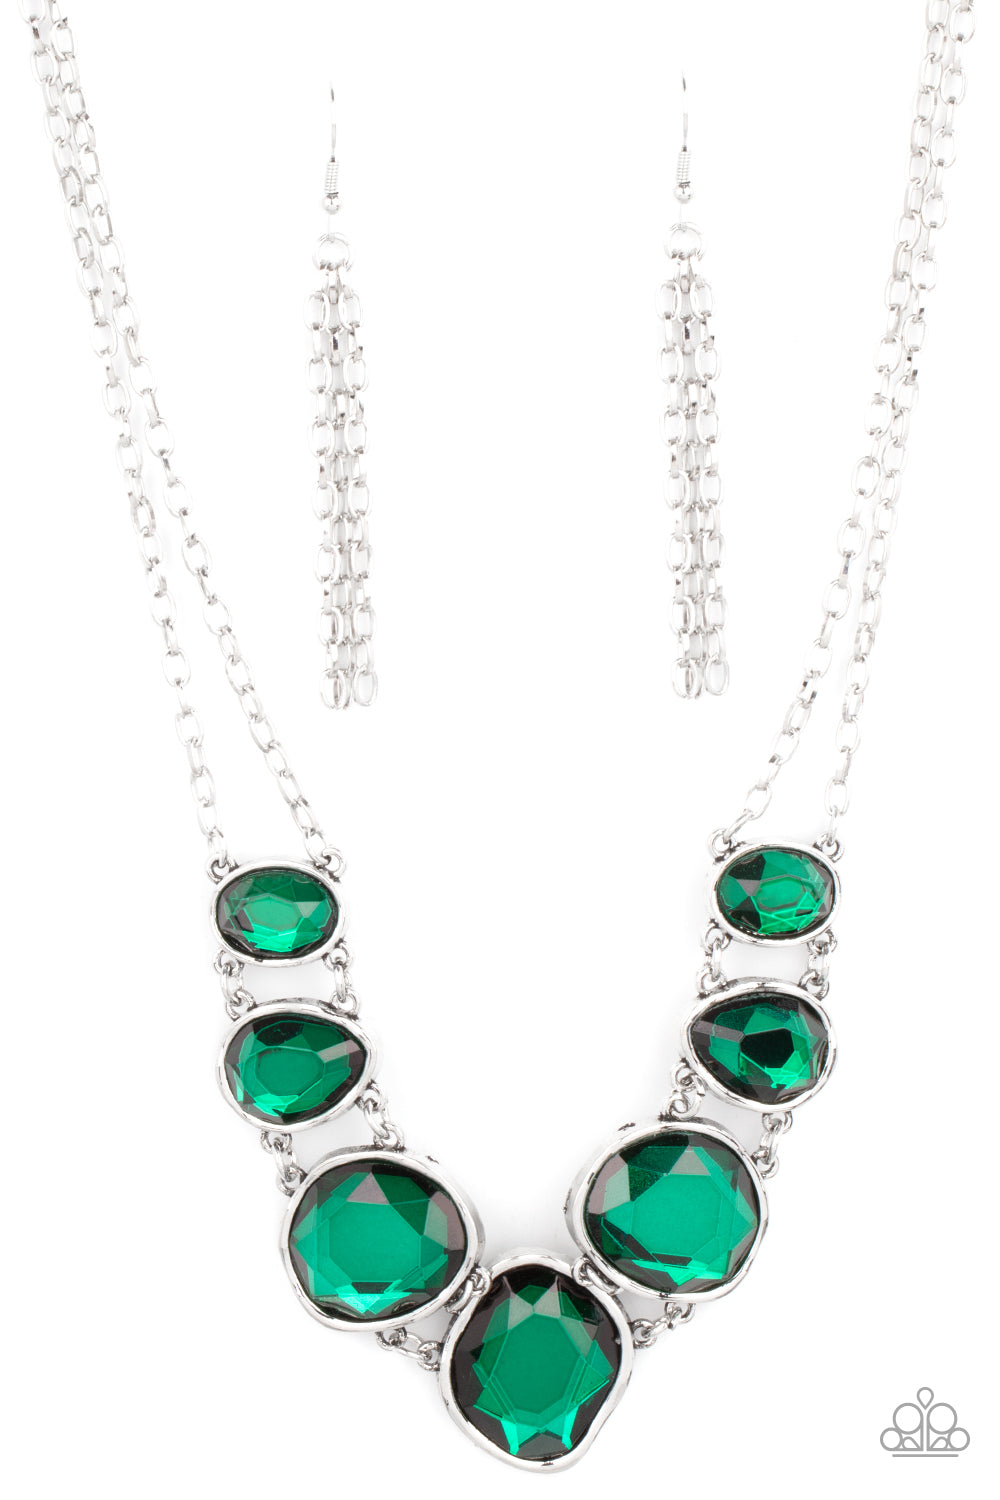 beesblingbash-absolute-admiration-green-necklace-paparazzi-accessories